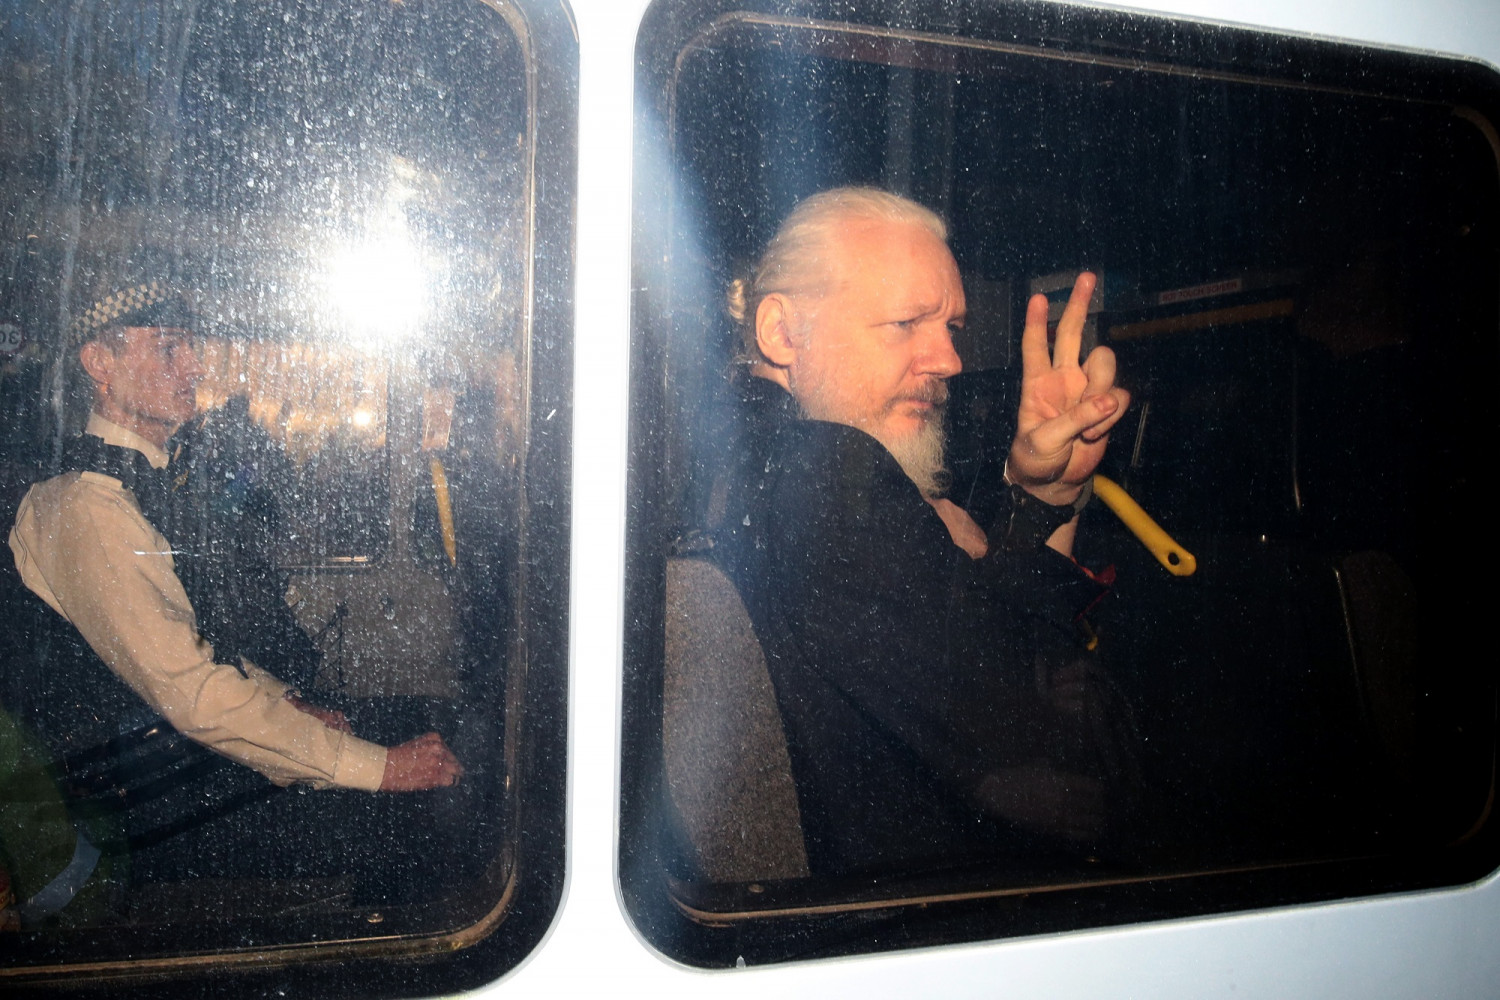 High Court Rejects WikiLeaks Founder Julian Assange’s Appeal Against Extradition to US